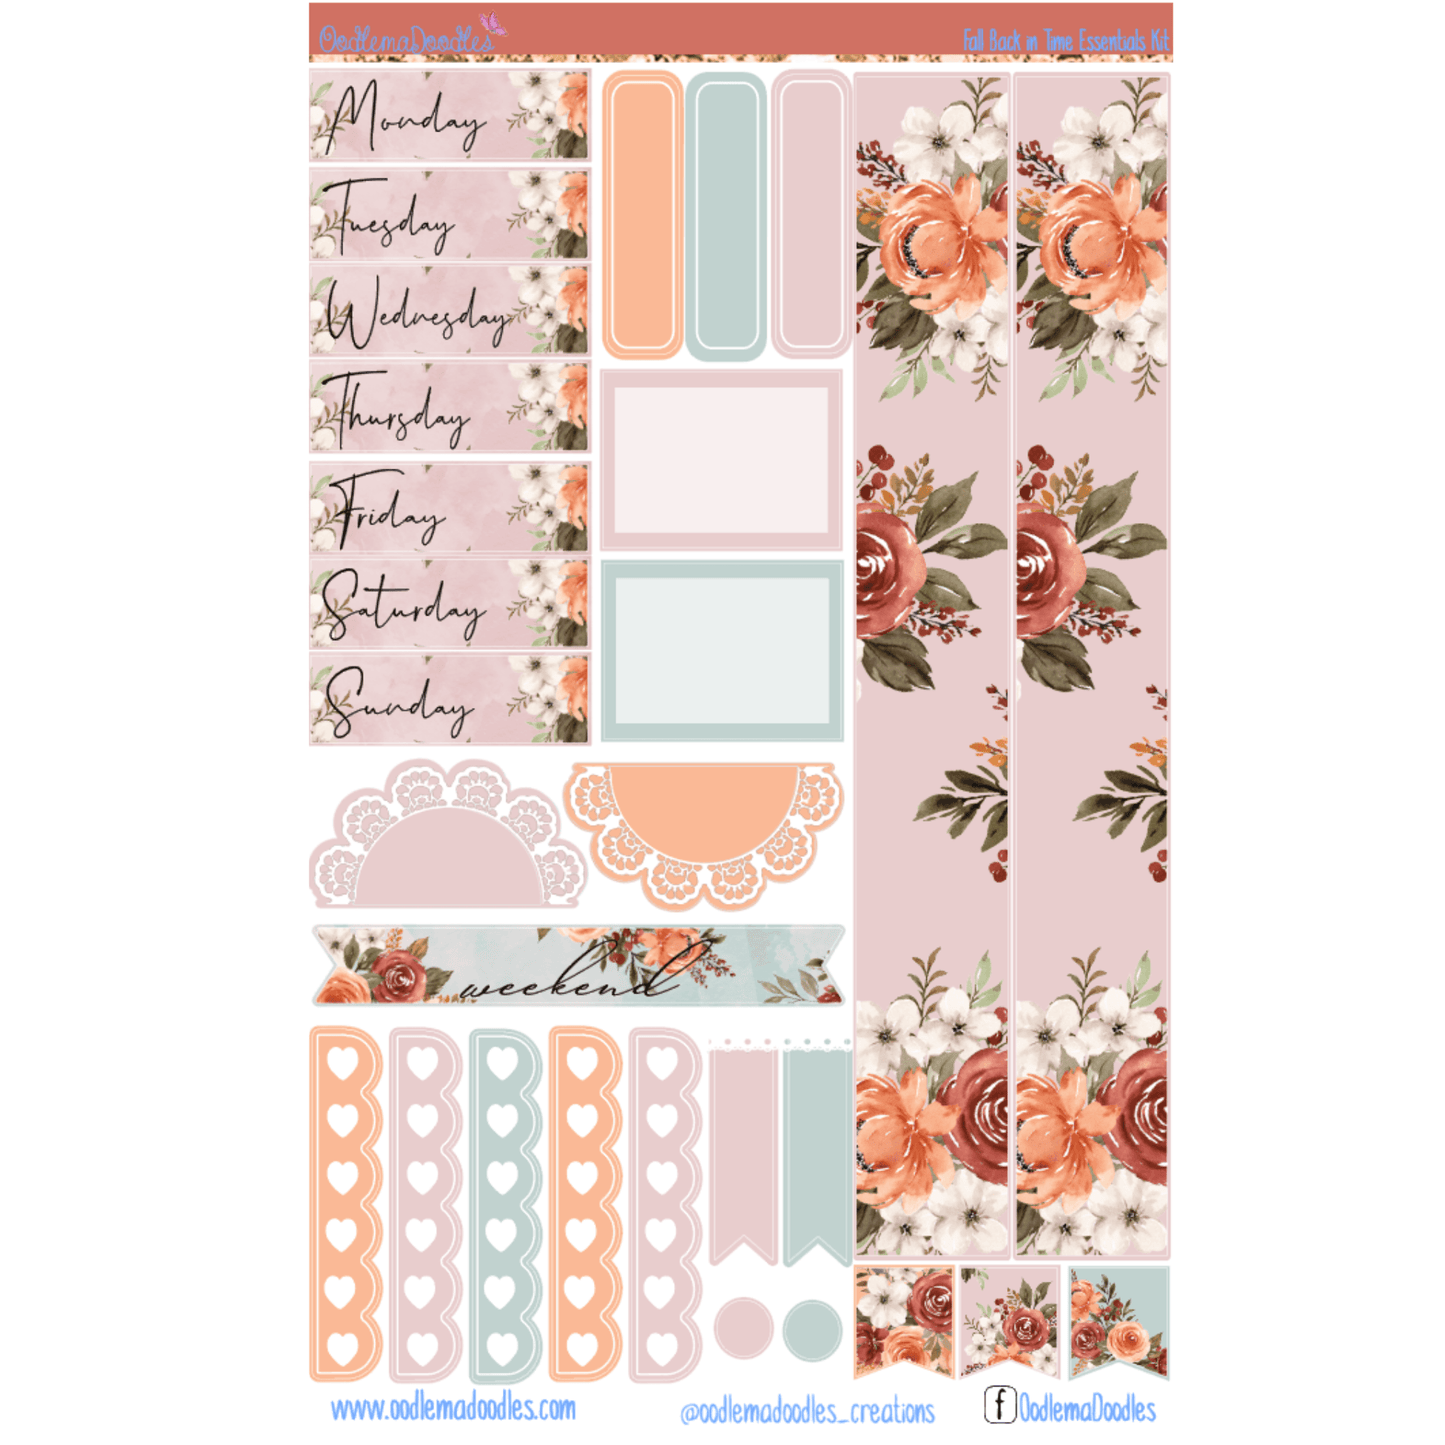 Fall Back in Time Essential Planner Sticker Kit